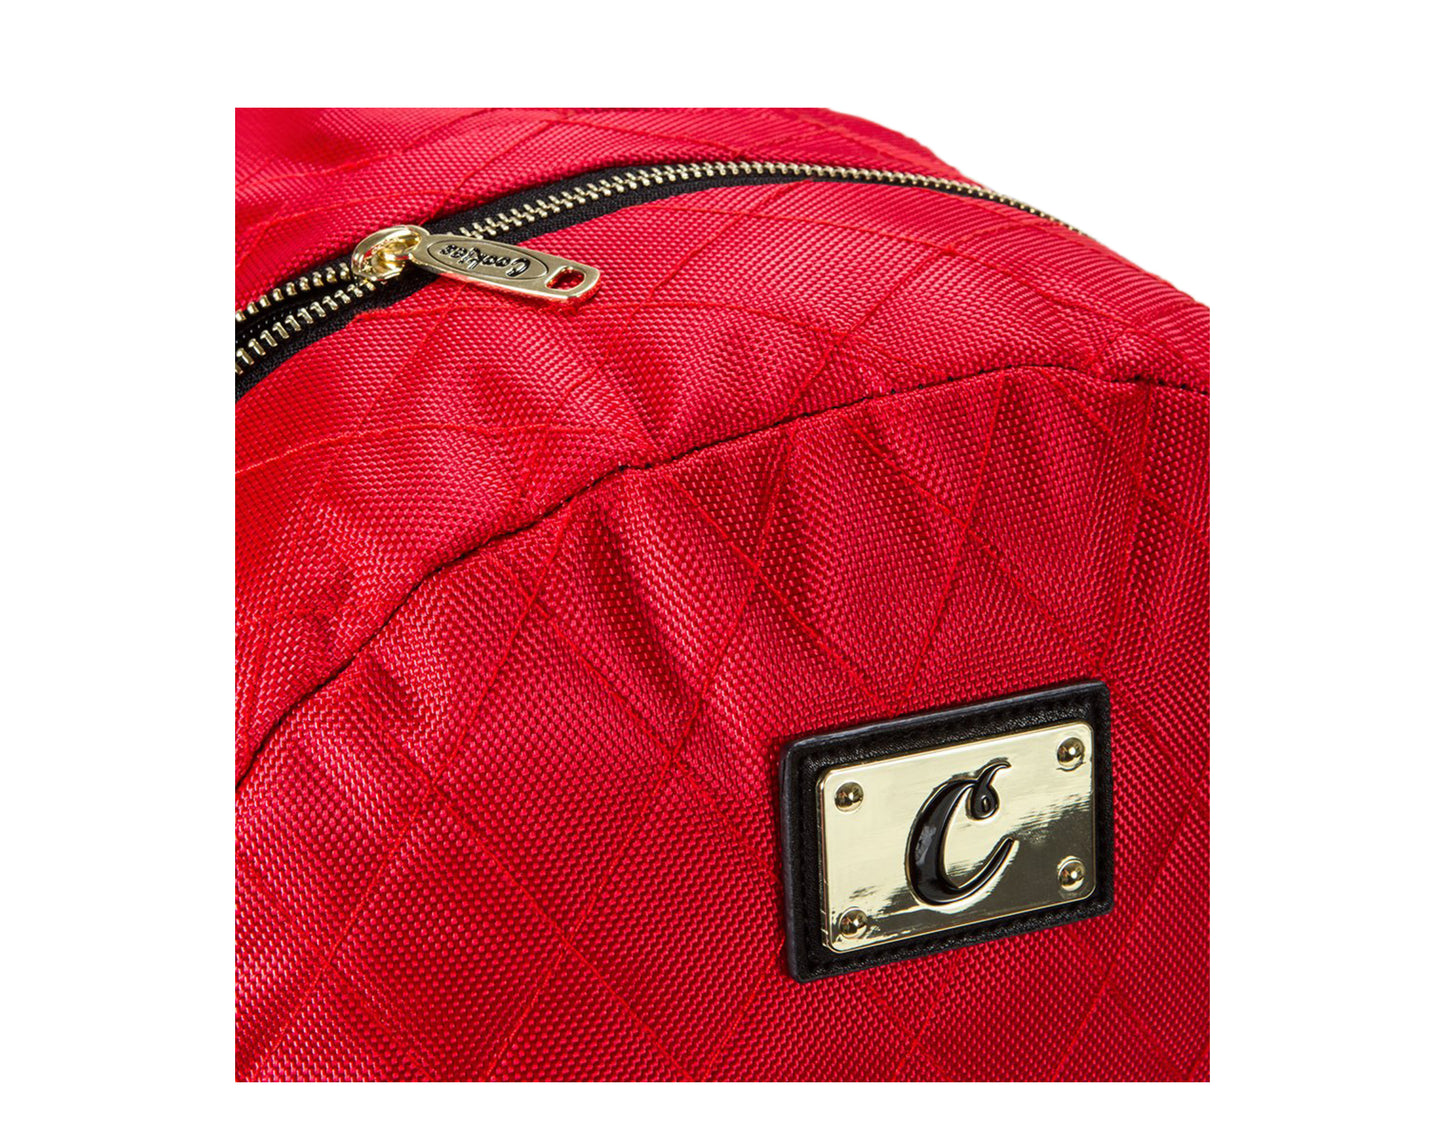 Cookies V3 Quilted Nylon Smell Proof Red Backpack 1546A4394-RED